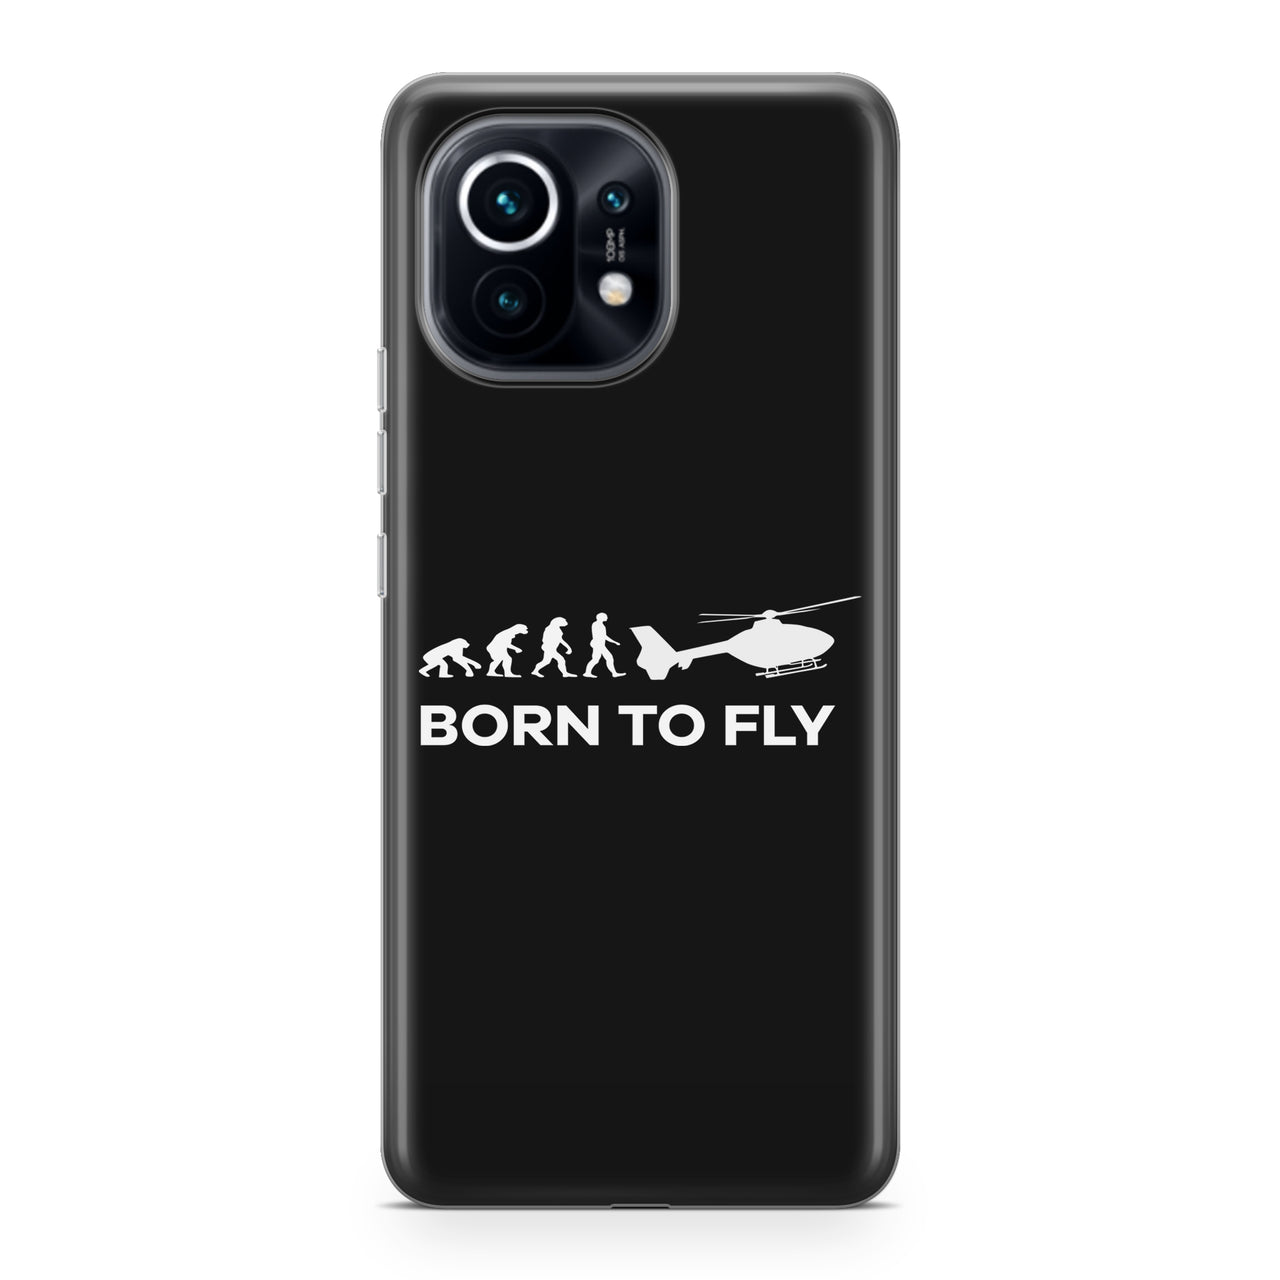 Born To Fly Helicopter Designed Xiaomi Cases